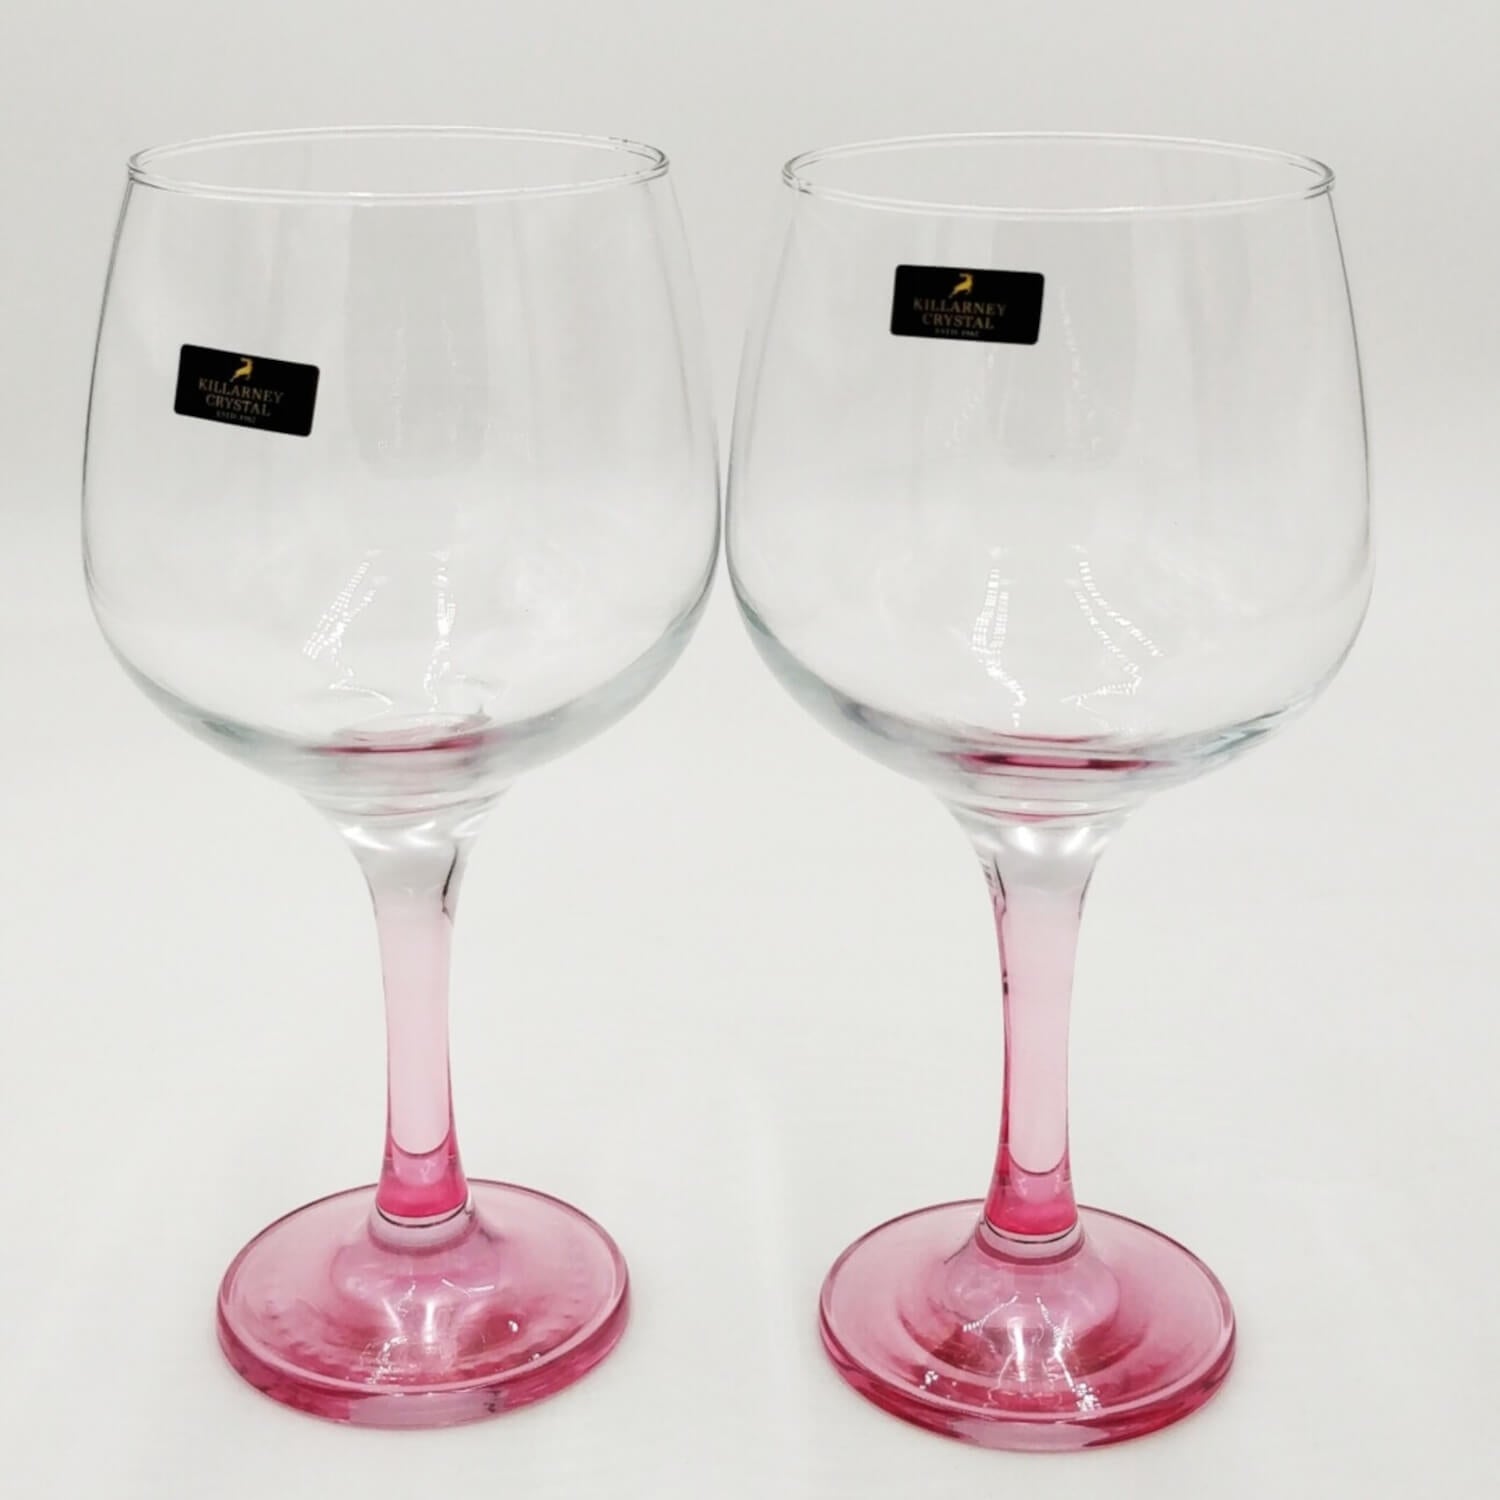 Killarney Crystal Jewel Collection - Pair of Gin Glasses 1 Shaws Department Stores